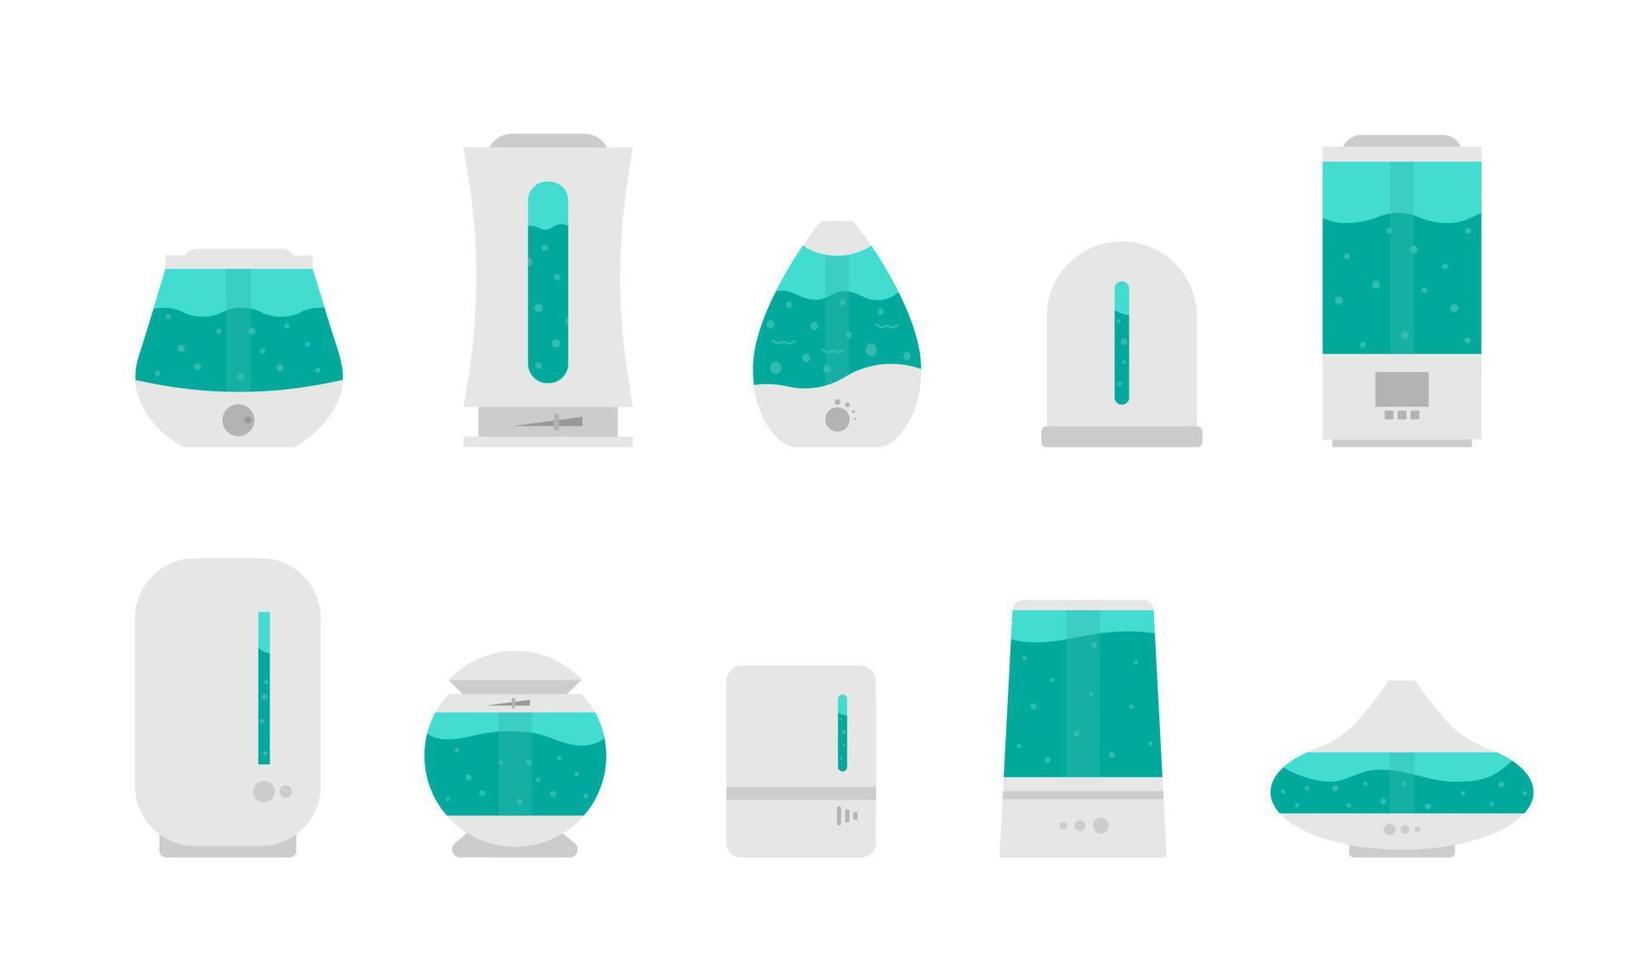 Humidifier. Ultrasonic air purifier. Cleaning and humidifying device. Modern vector illustration in flat style.